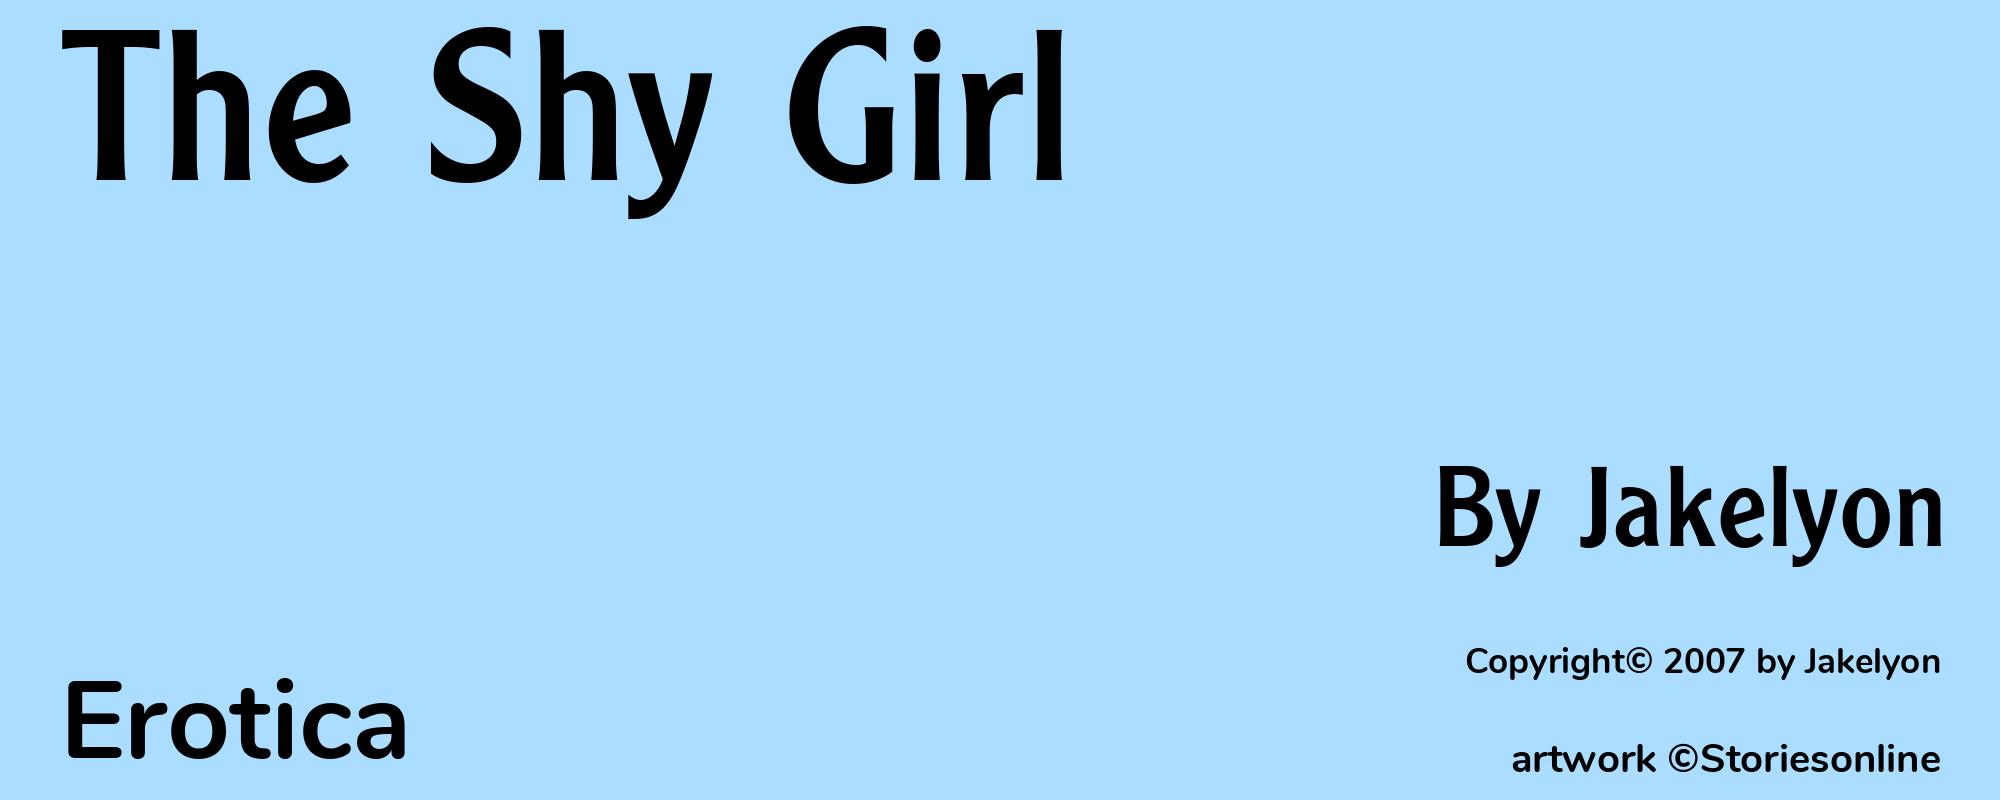 The Shy Girl - Cover